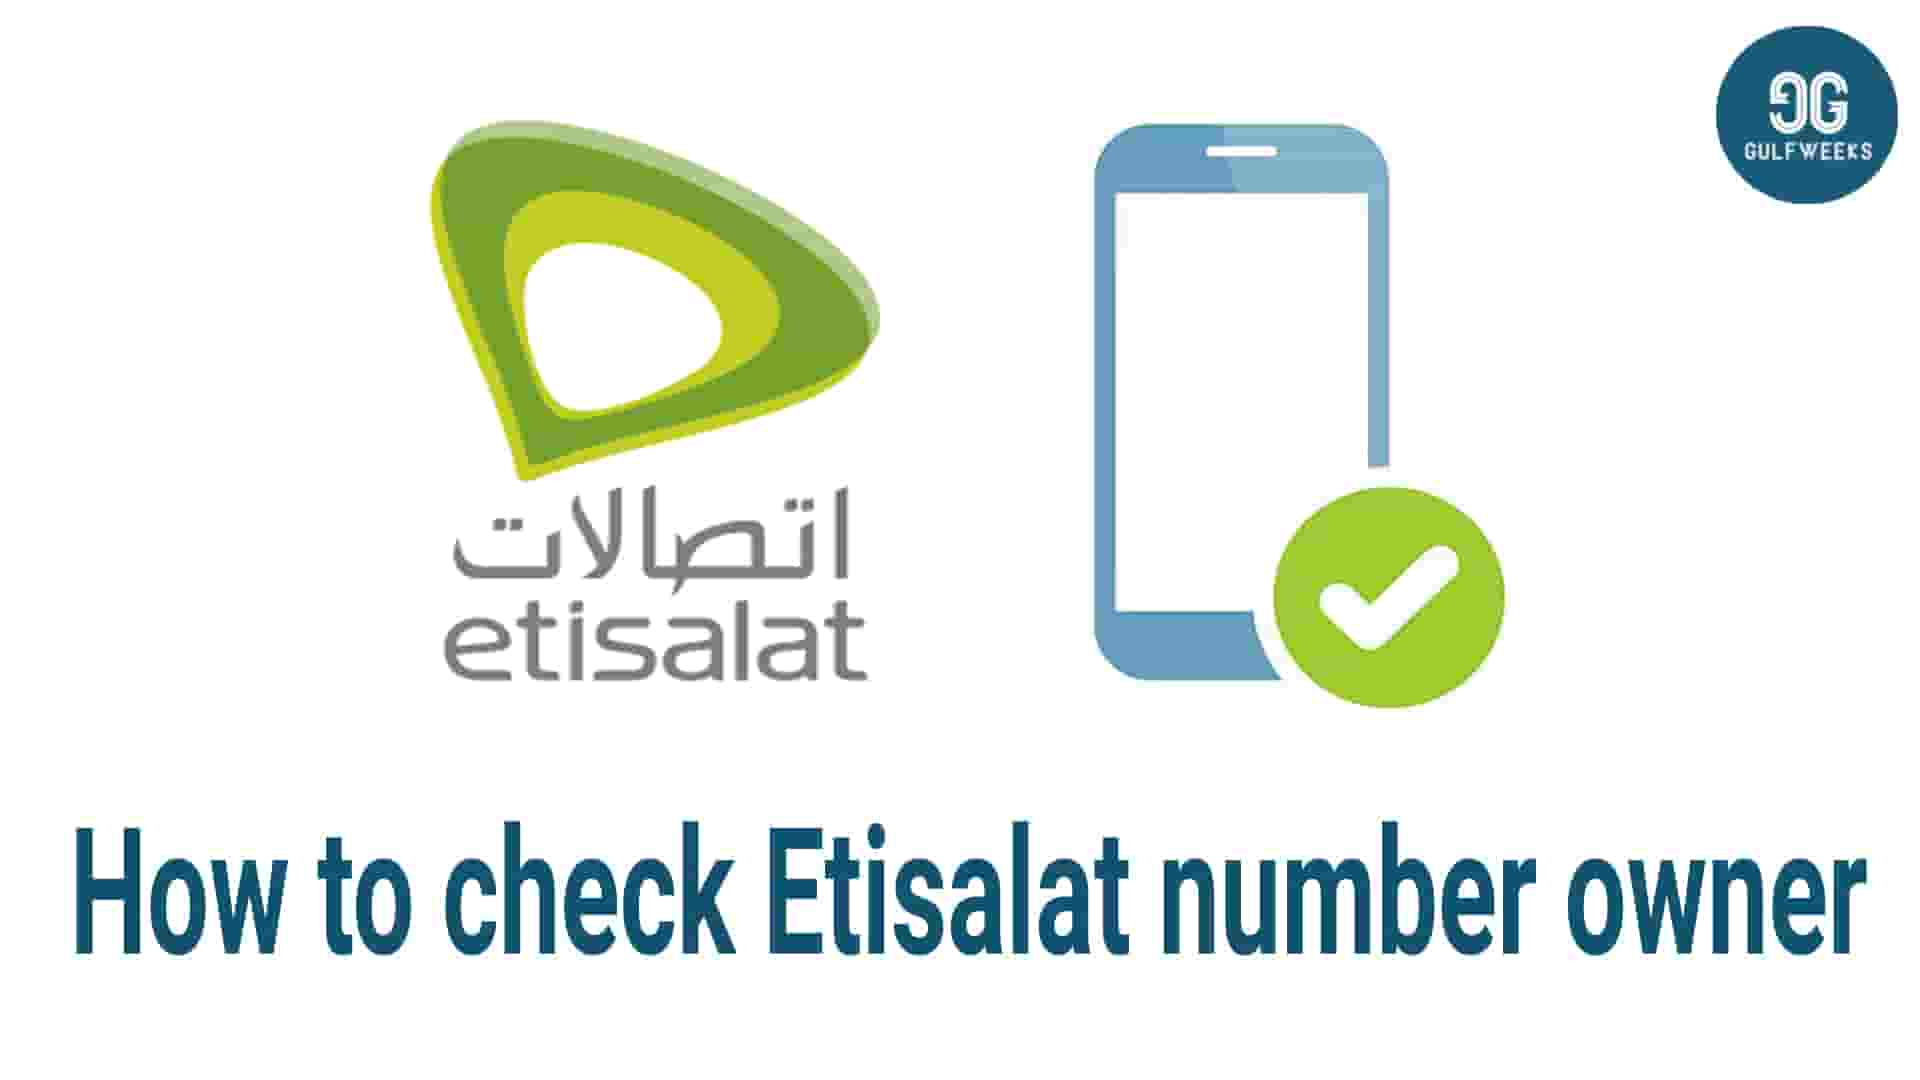 How to check Etisalat number owner